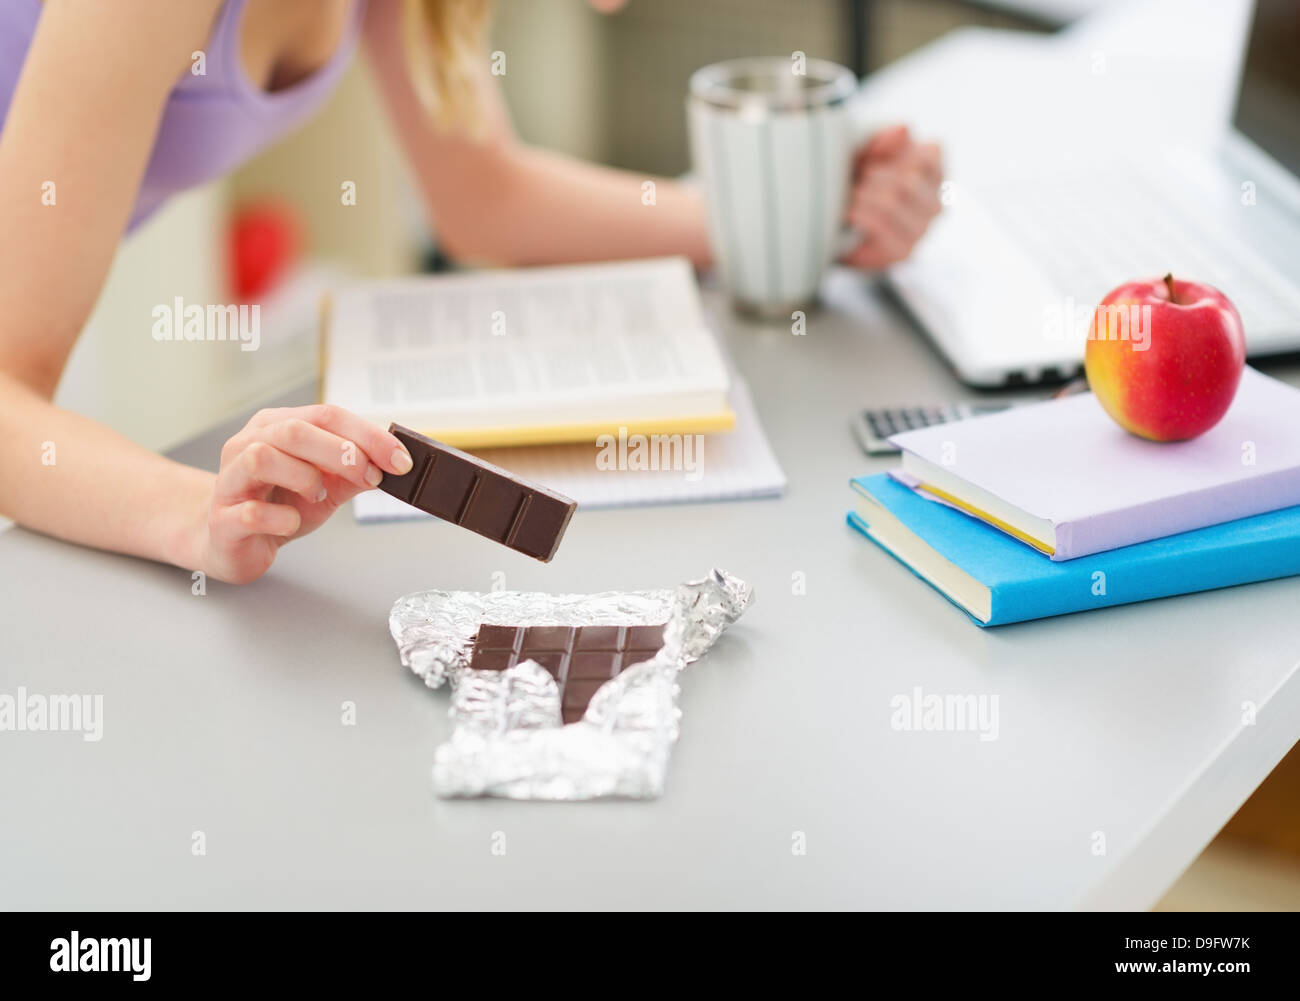 Closeup on teenage girl eating chocolate while studying in kitchen Stock Photo